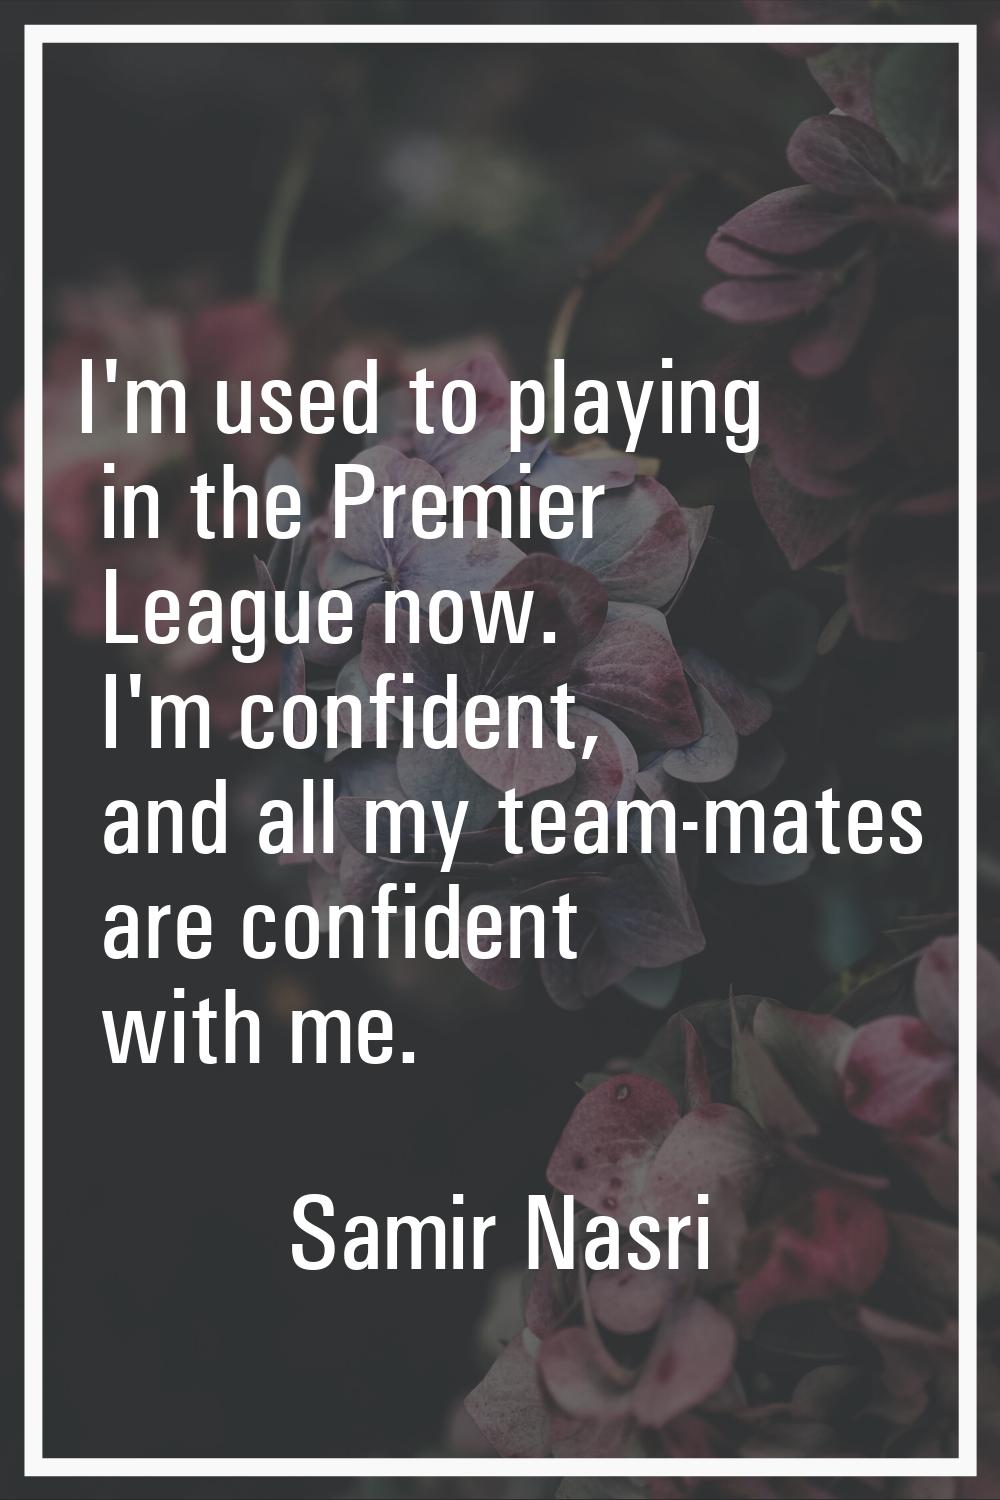 I'm used to playing in the Premier League now. I'm confident, and all my team-mates are confident w